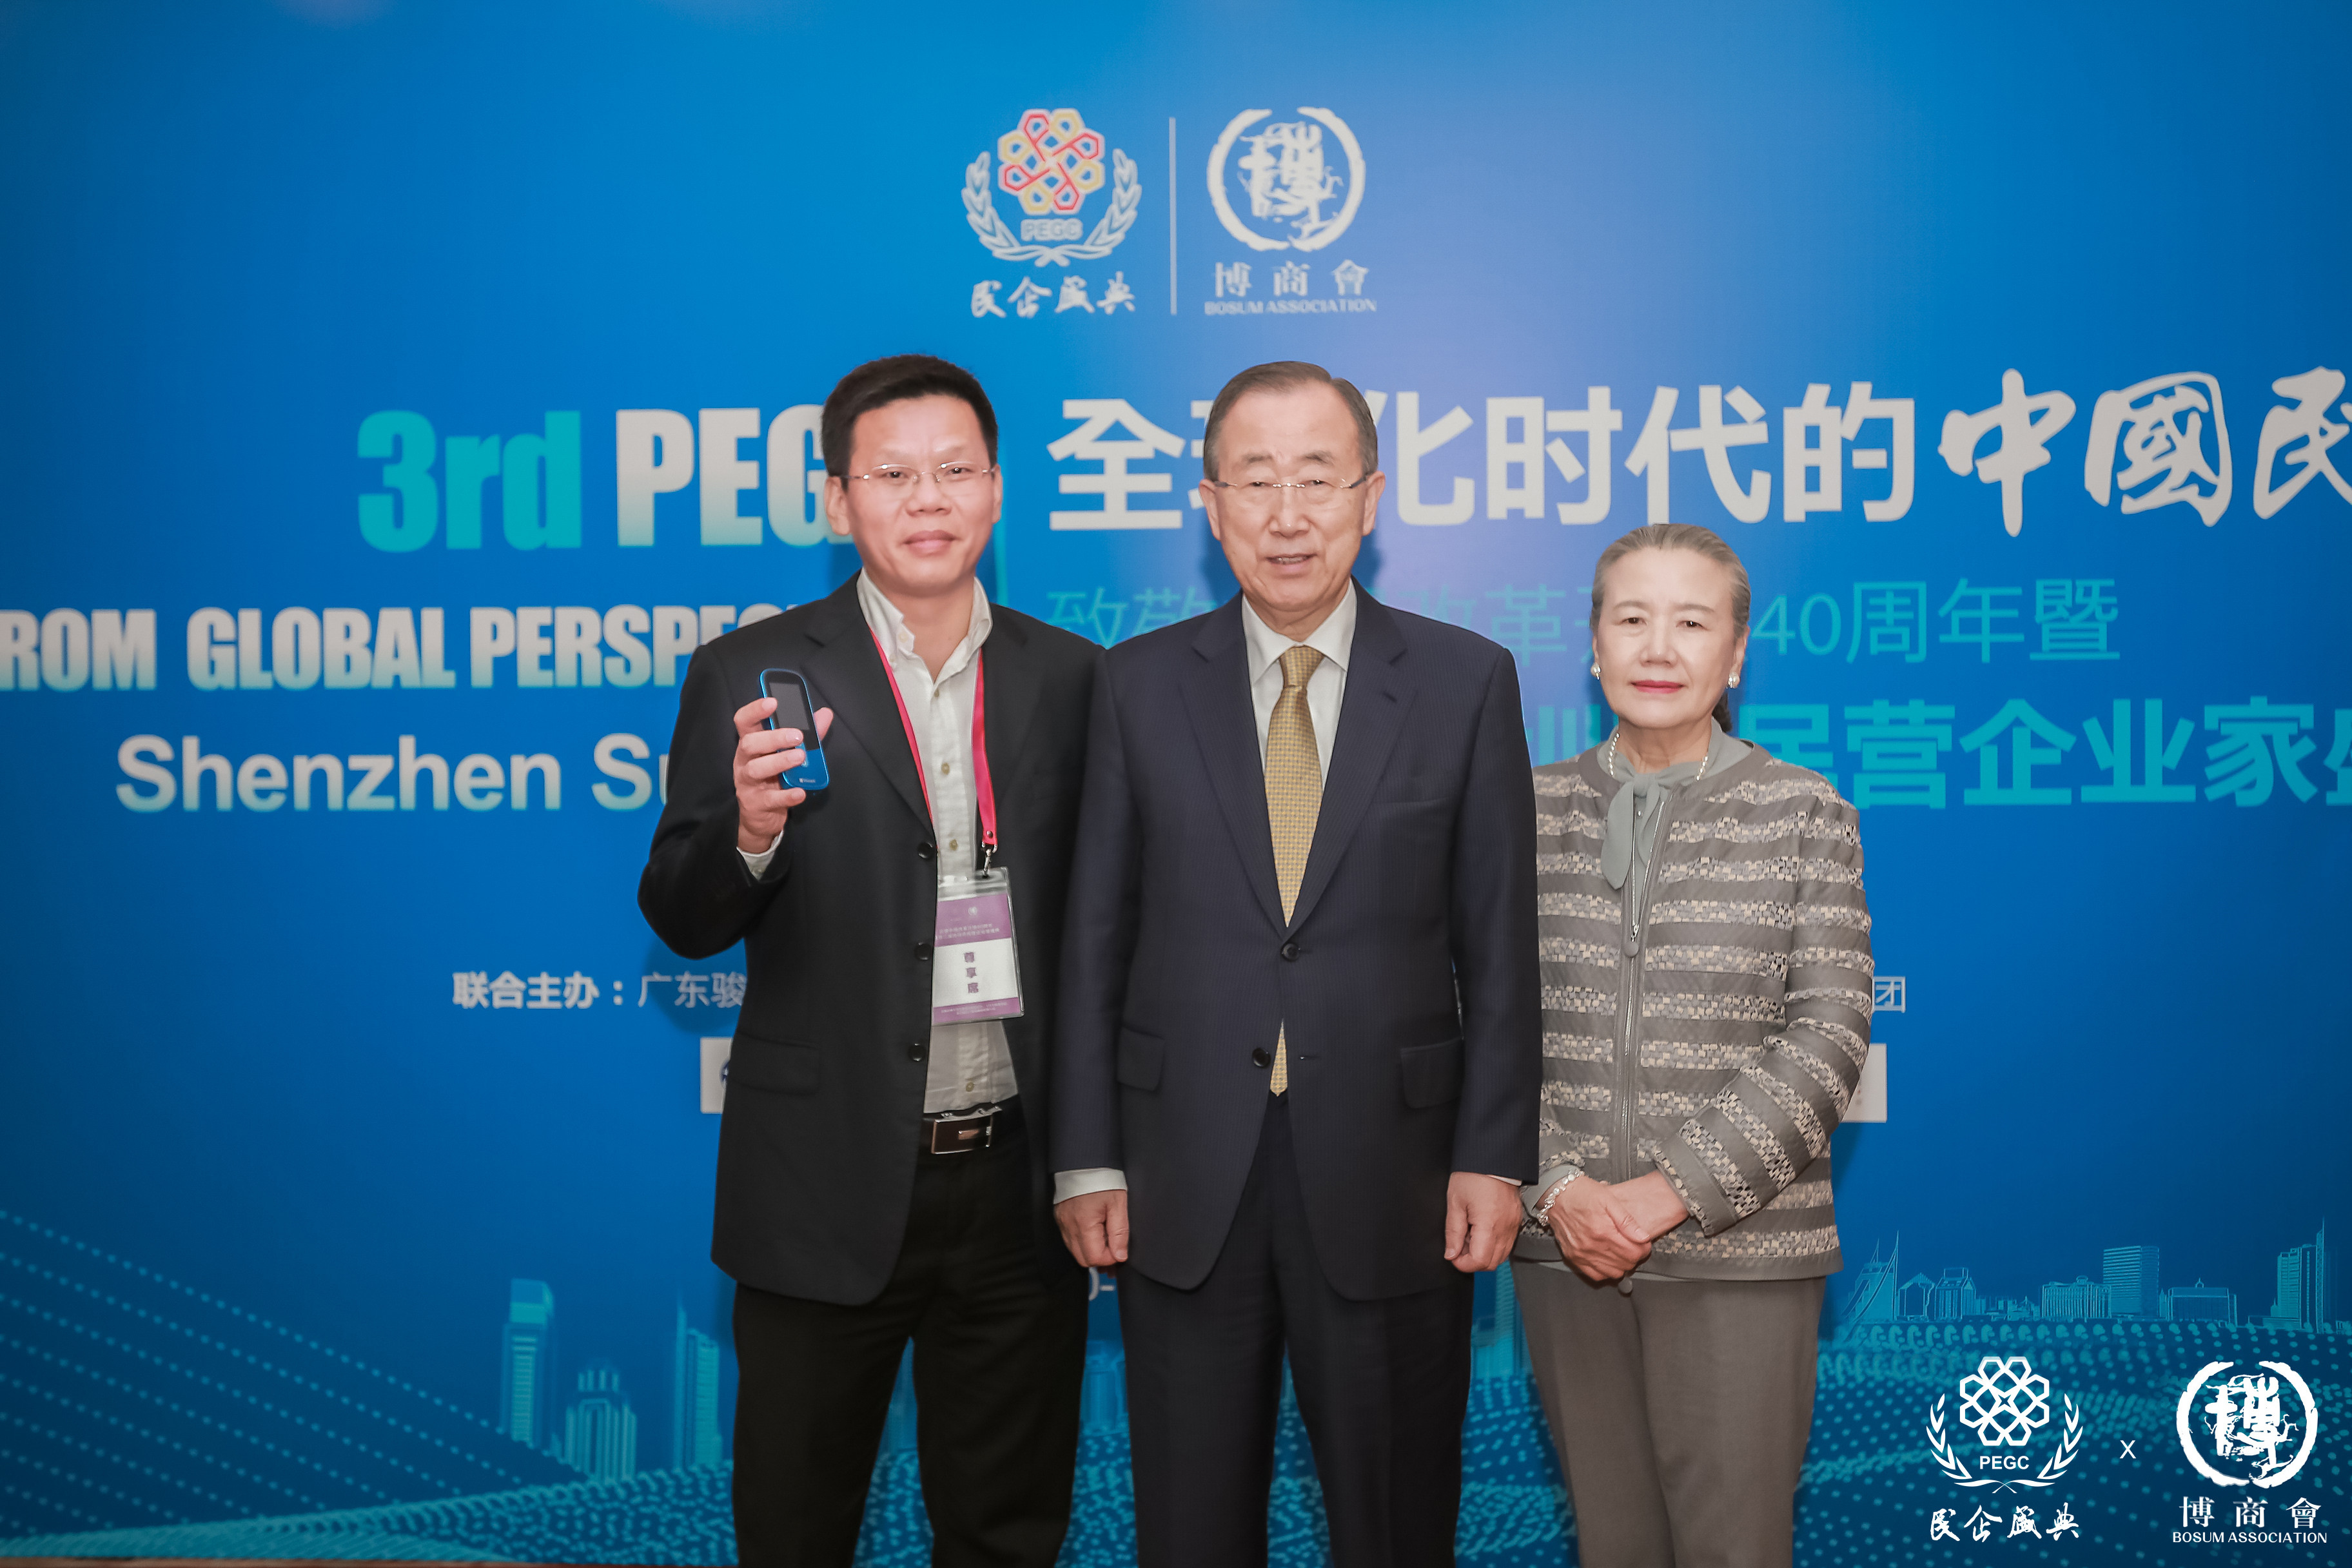 The Third Shenzhen PEGC has successfully concluded.